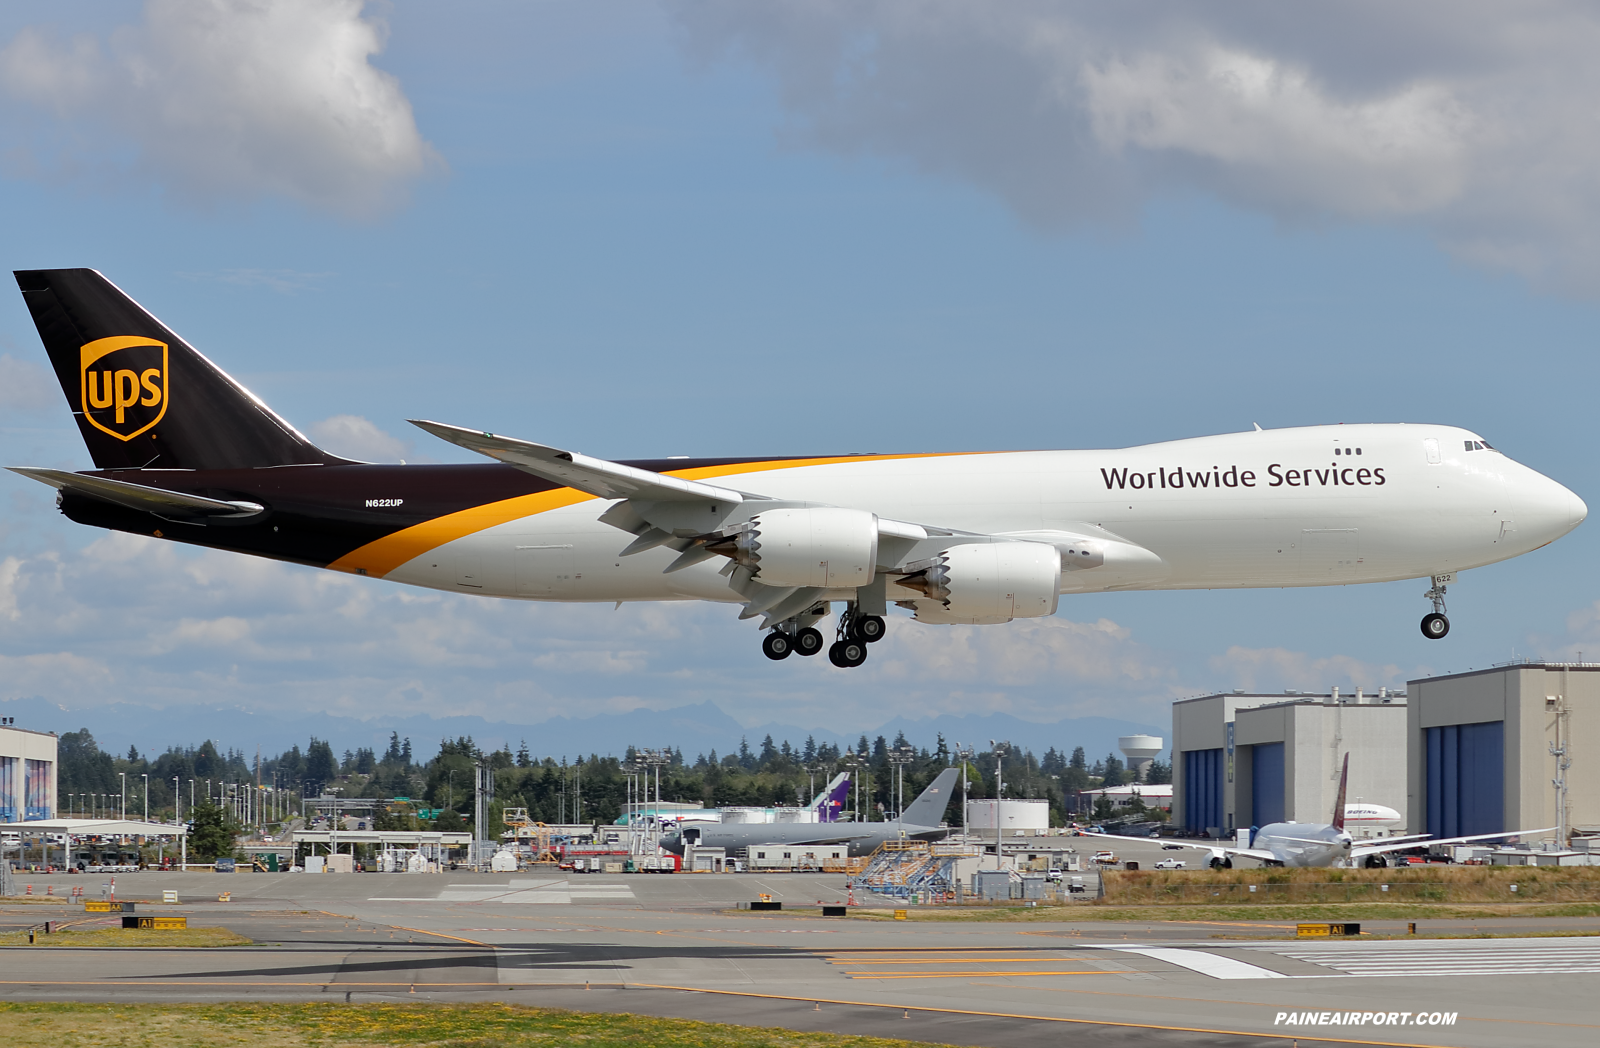 UPS 747-8F N622UP at KPAE Paine Field